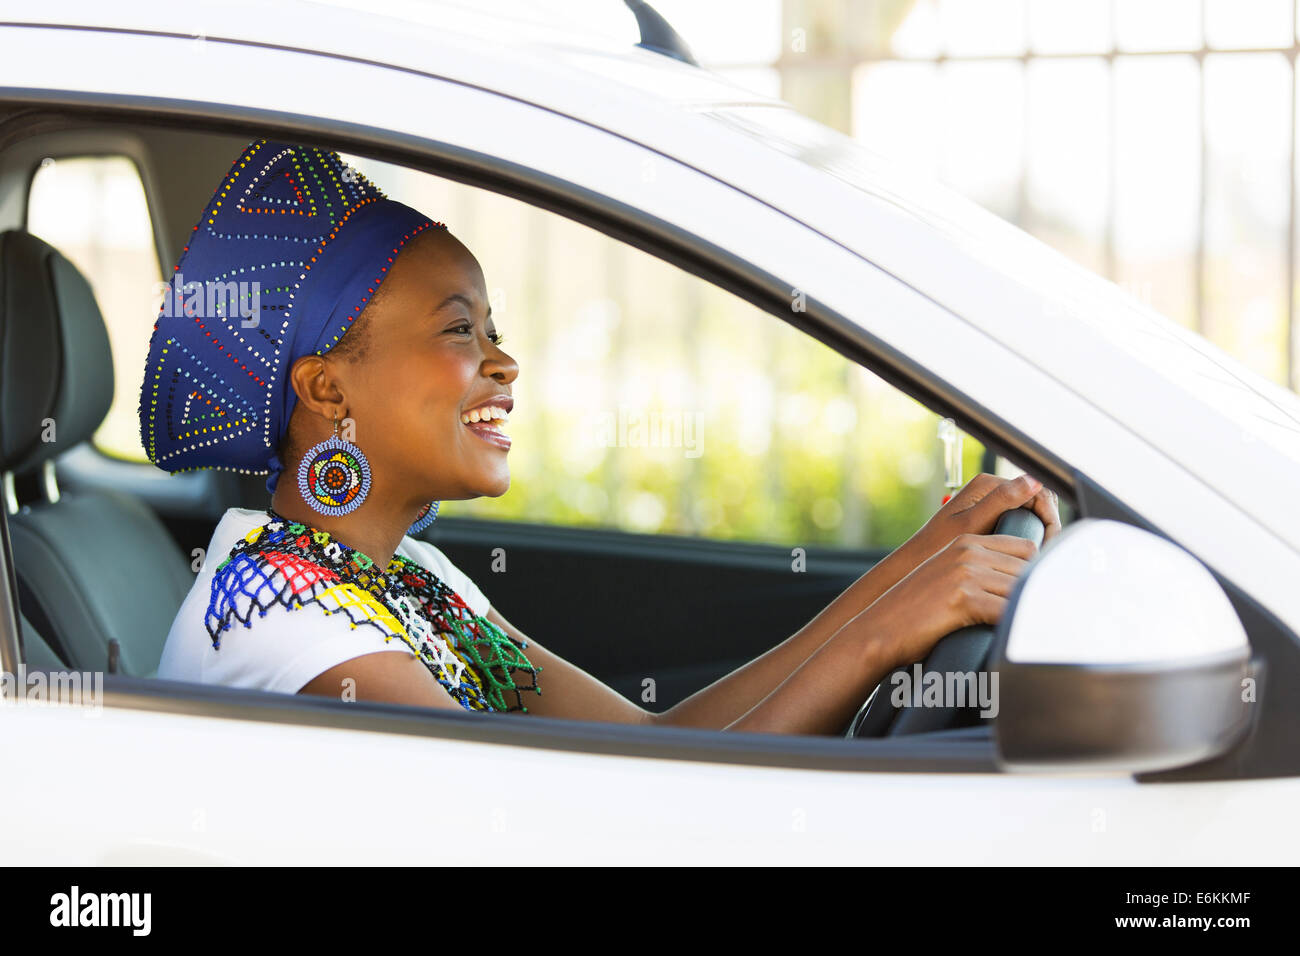 cheerful African female driver inside a car Stock Photo